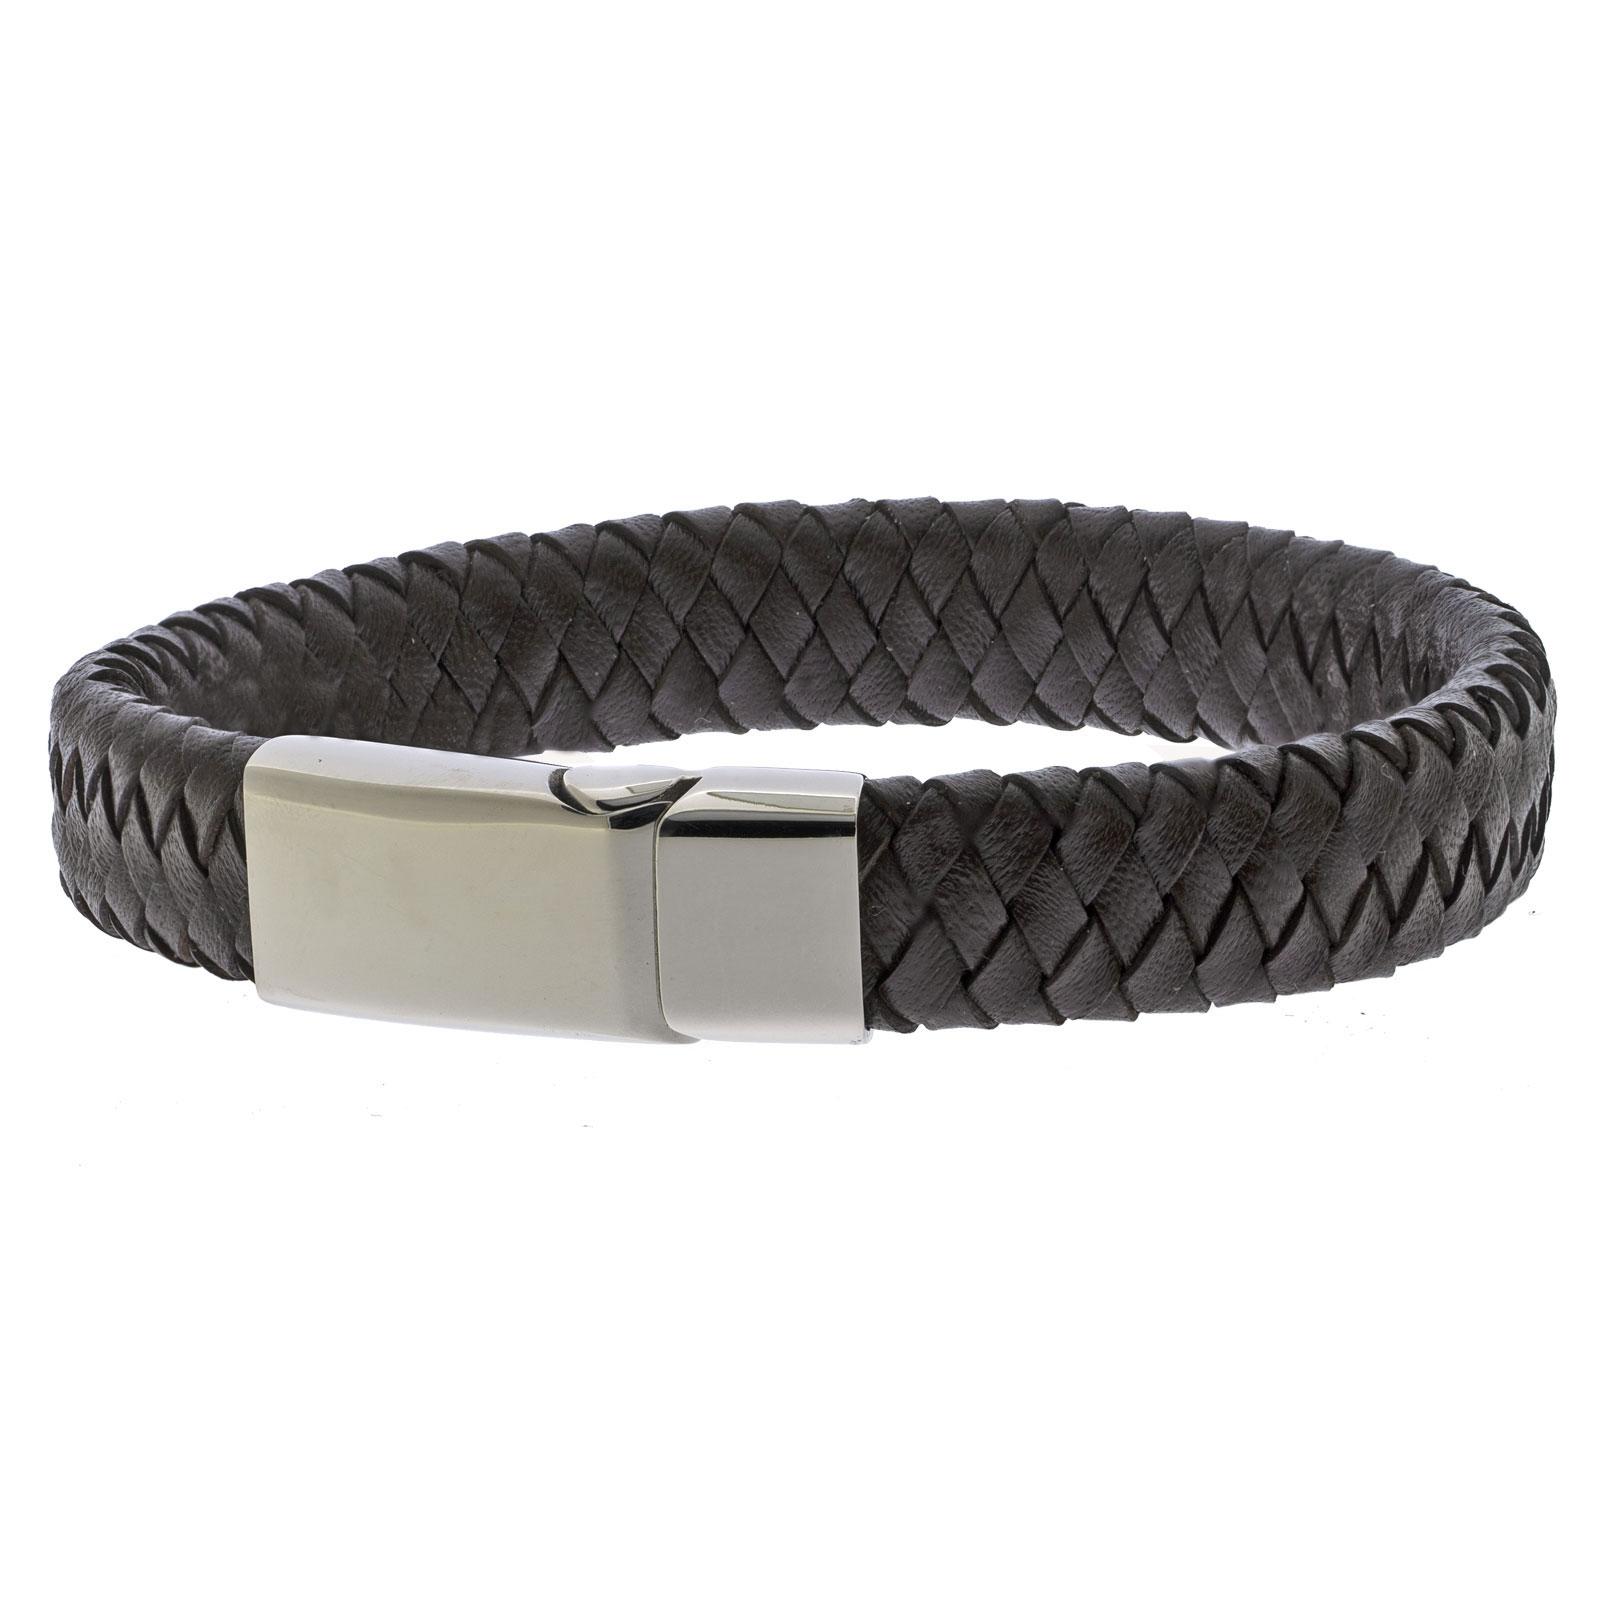 Brown Braided Leather Bracelet for men with a steel magnetic sliding clasp